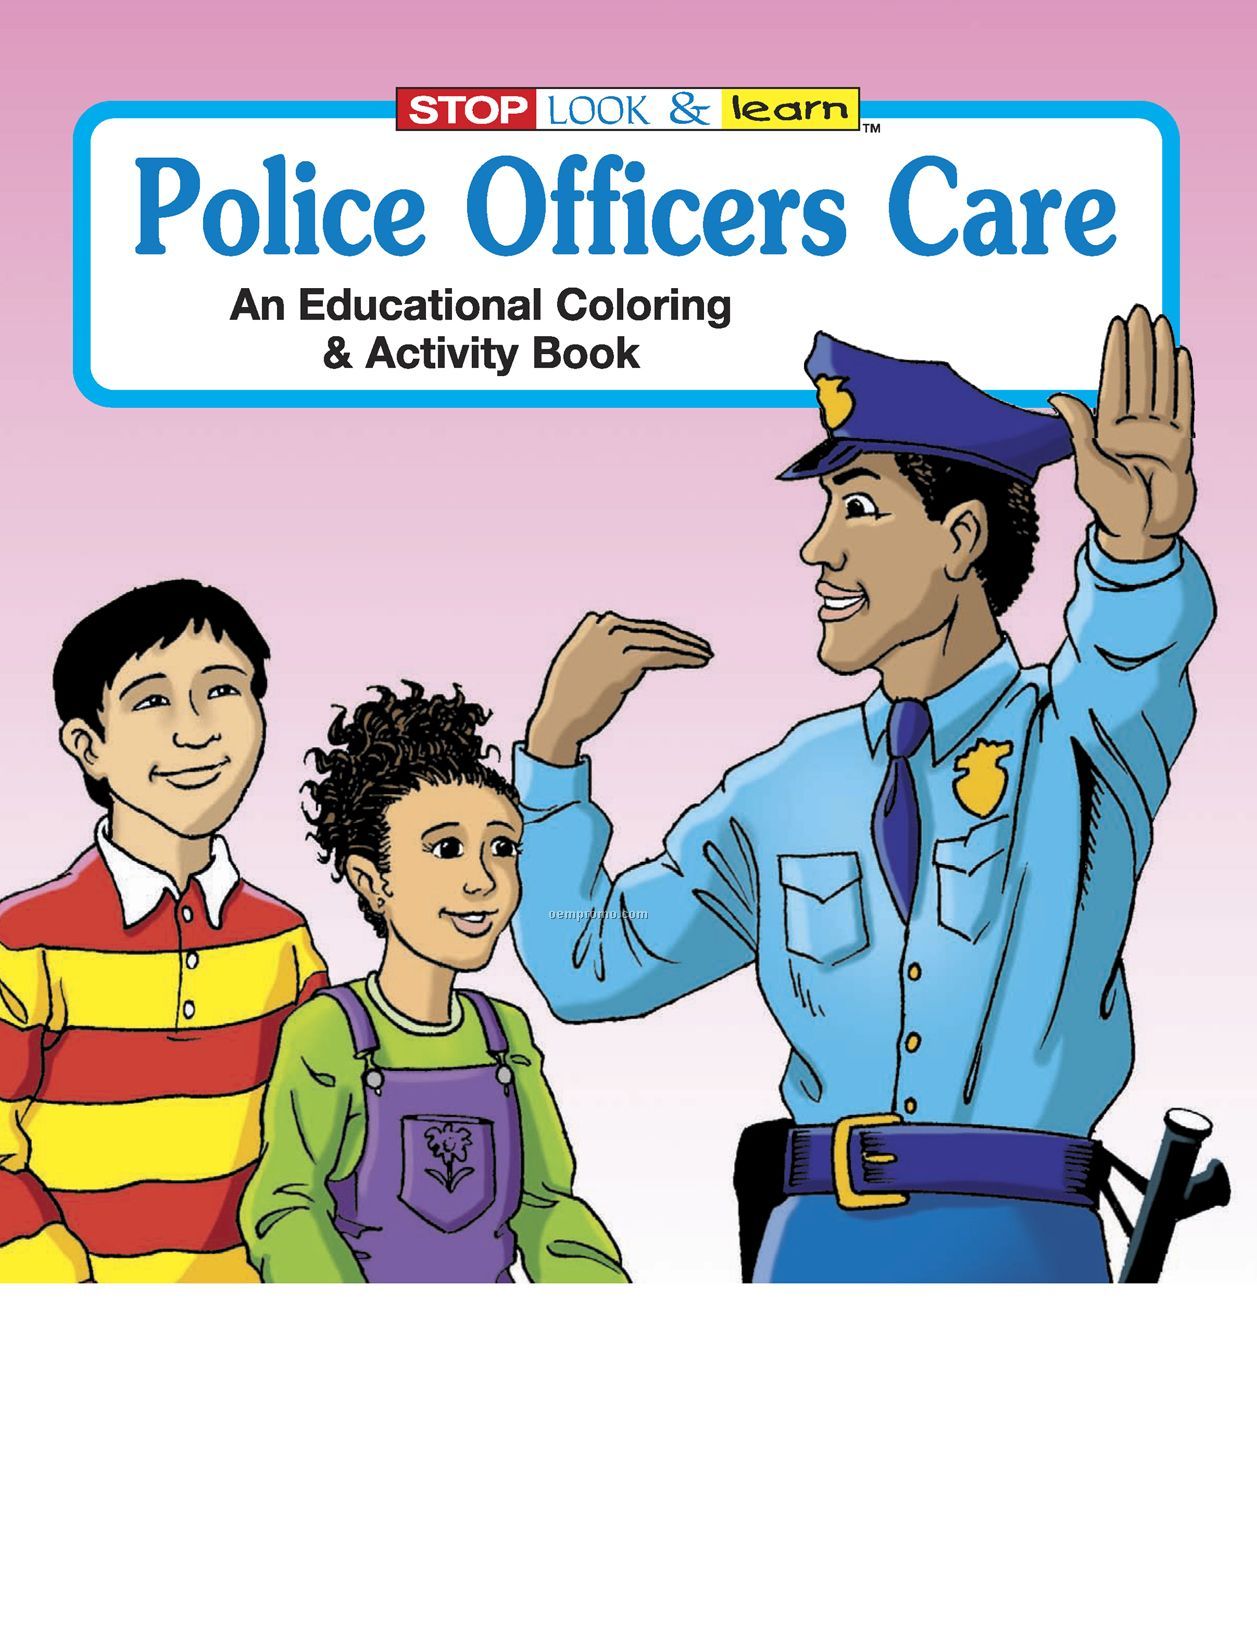 Police Officers Care Fun Pack